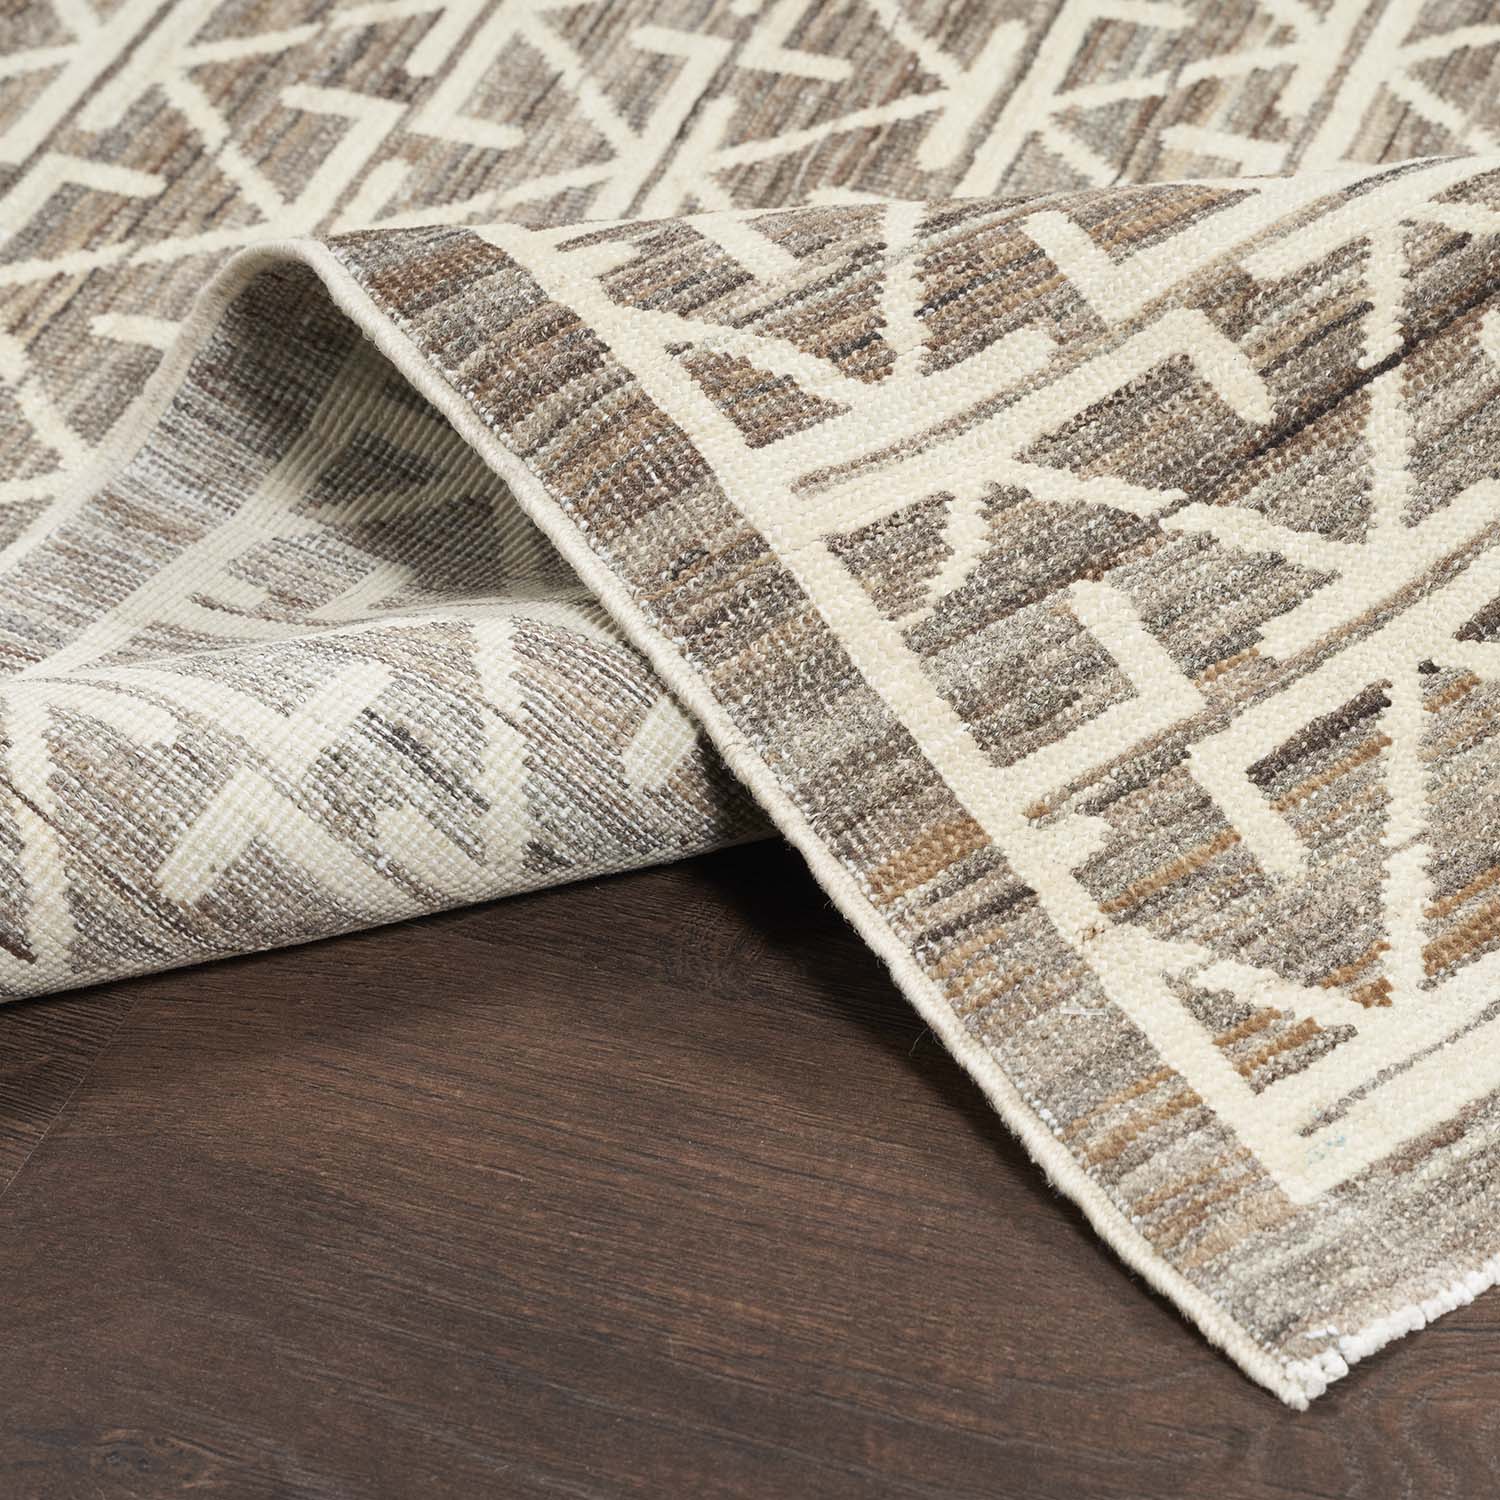 Close-up of modern geometric rug on wooden floor, revealing texture.